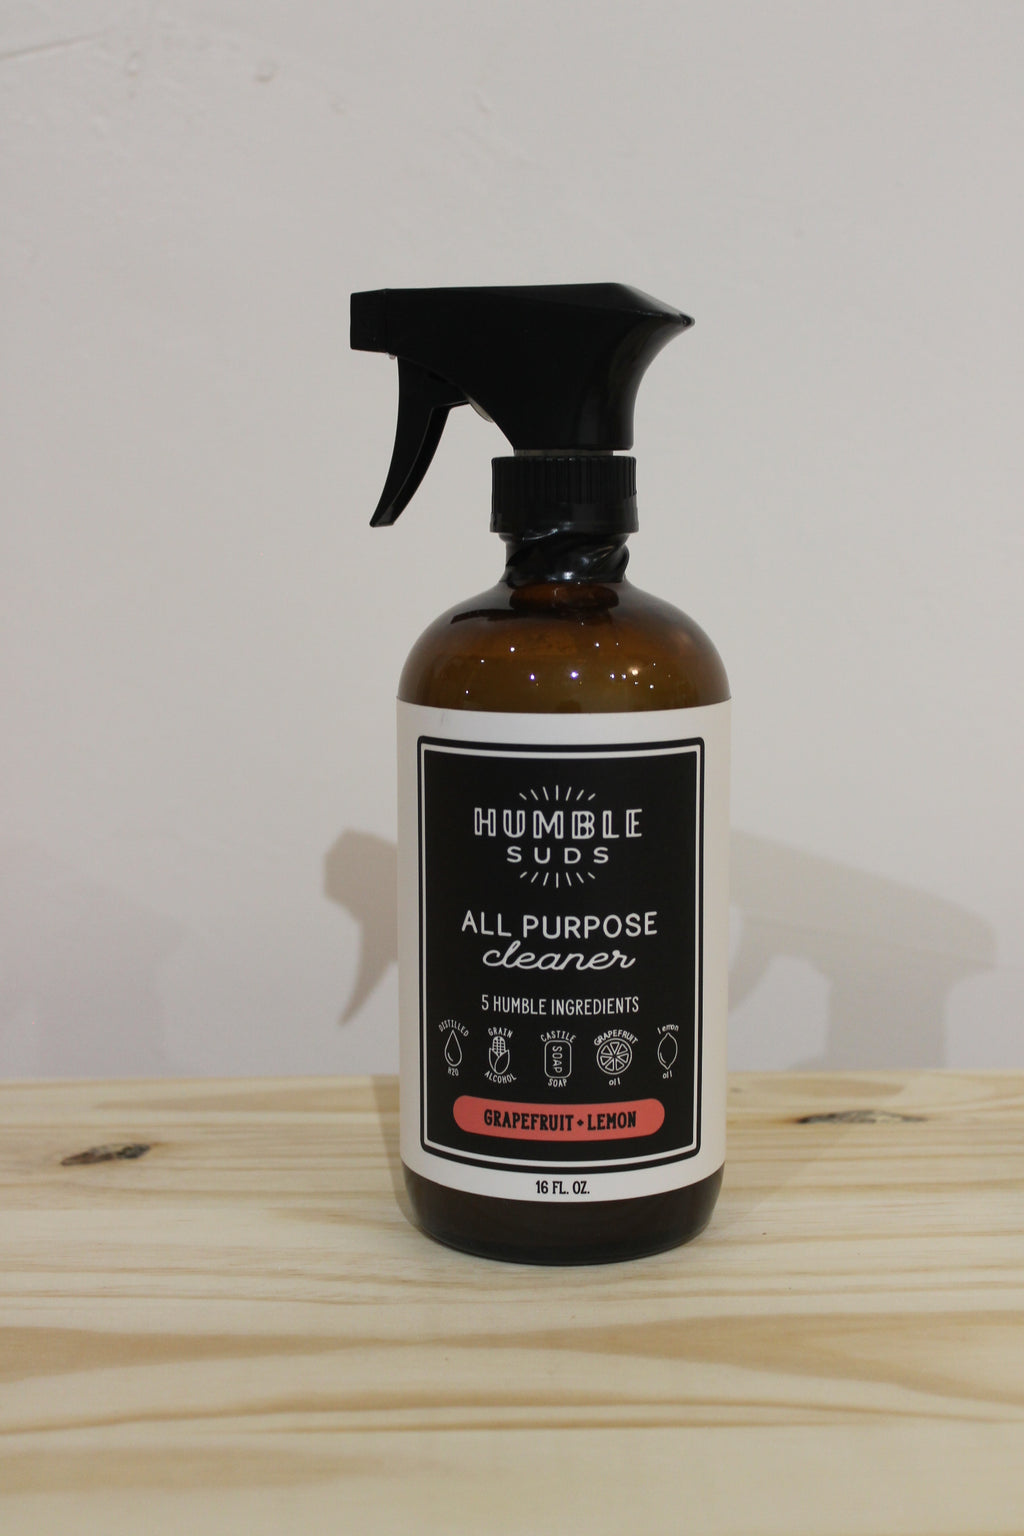 Humble Suds All Purpose Cleaner - 16 oz